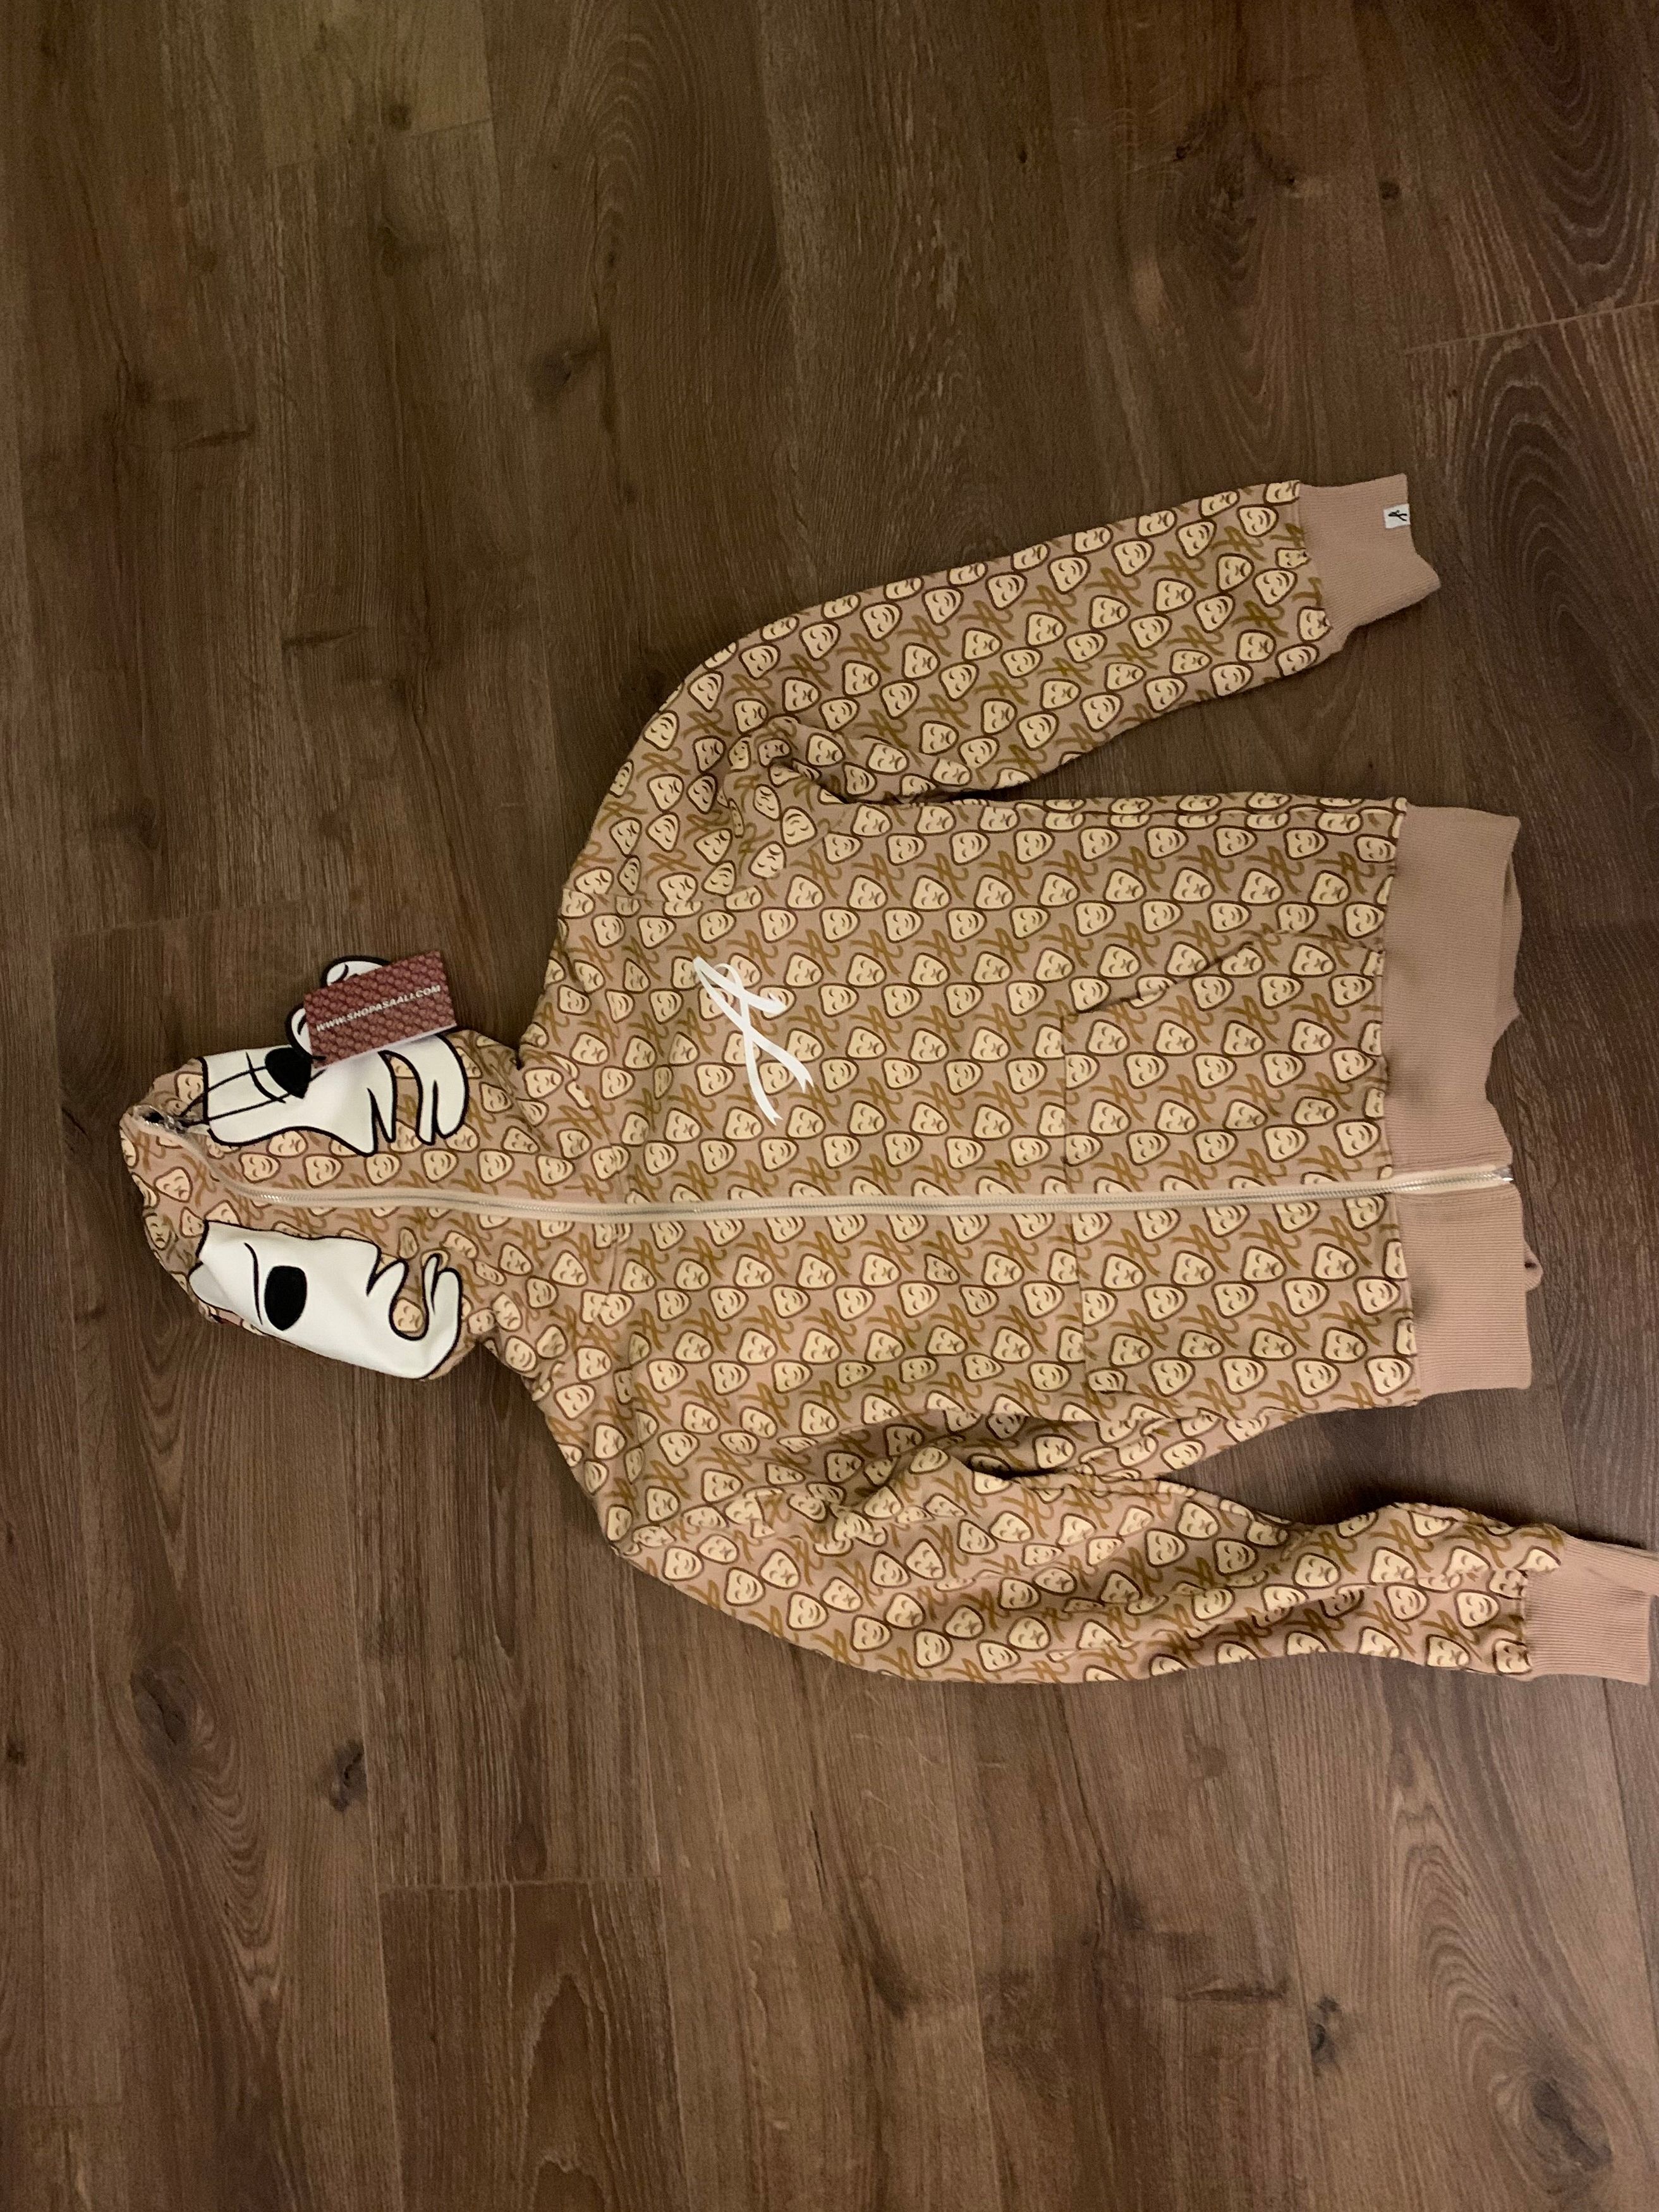 Streetwear Asaali 1st Beige All Over Print White Leather Mask Hoodie Size US M / EU 48-50 / 2 - 1 Preview